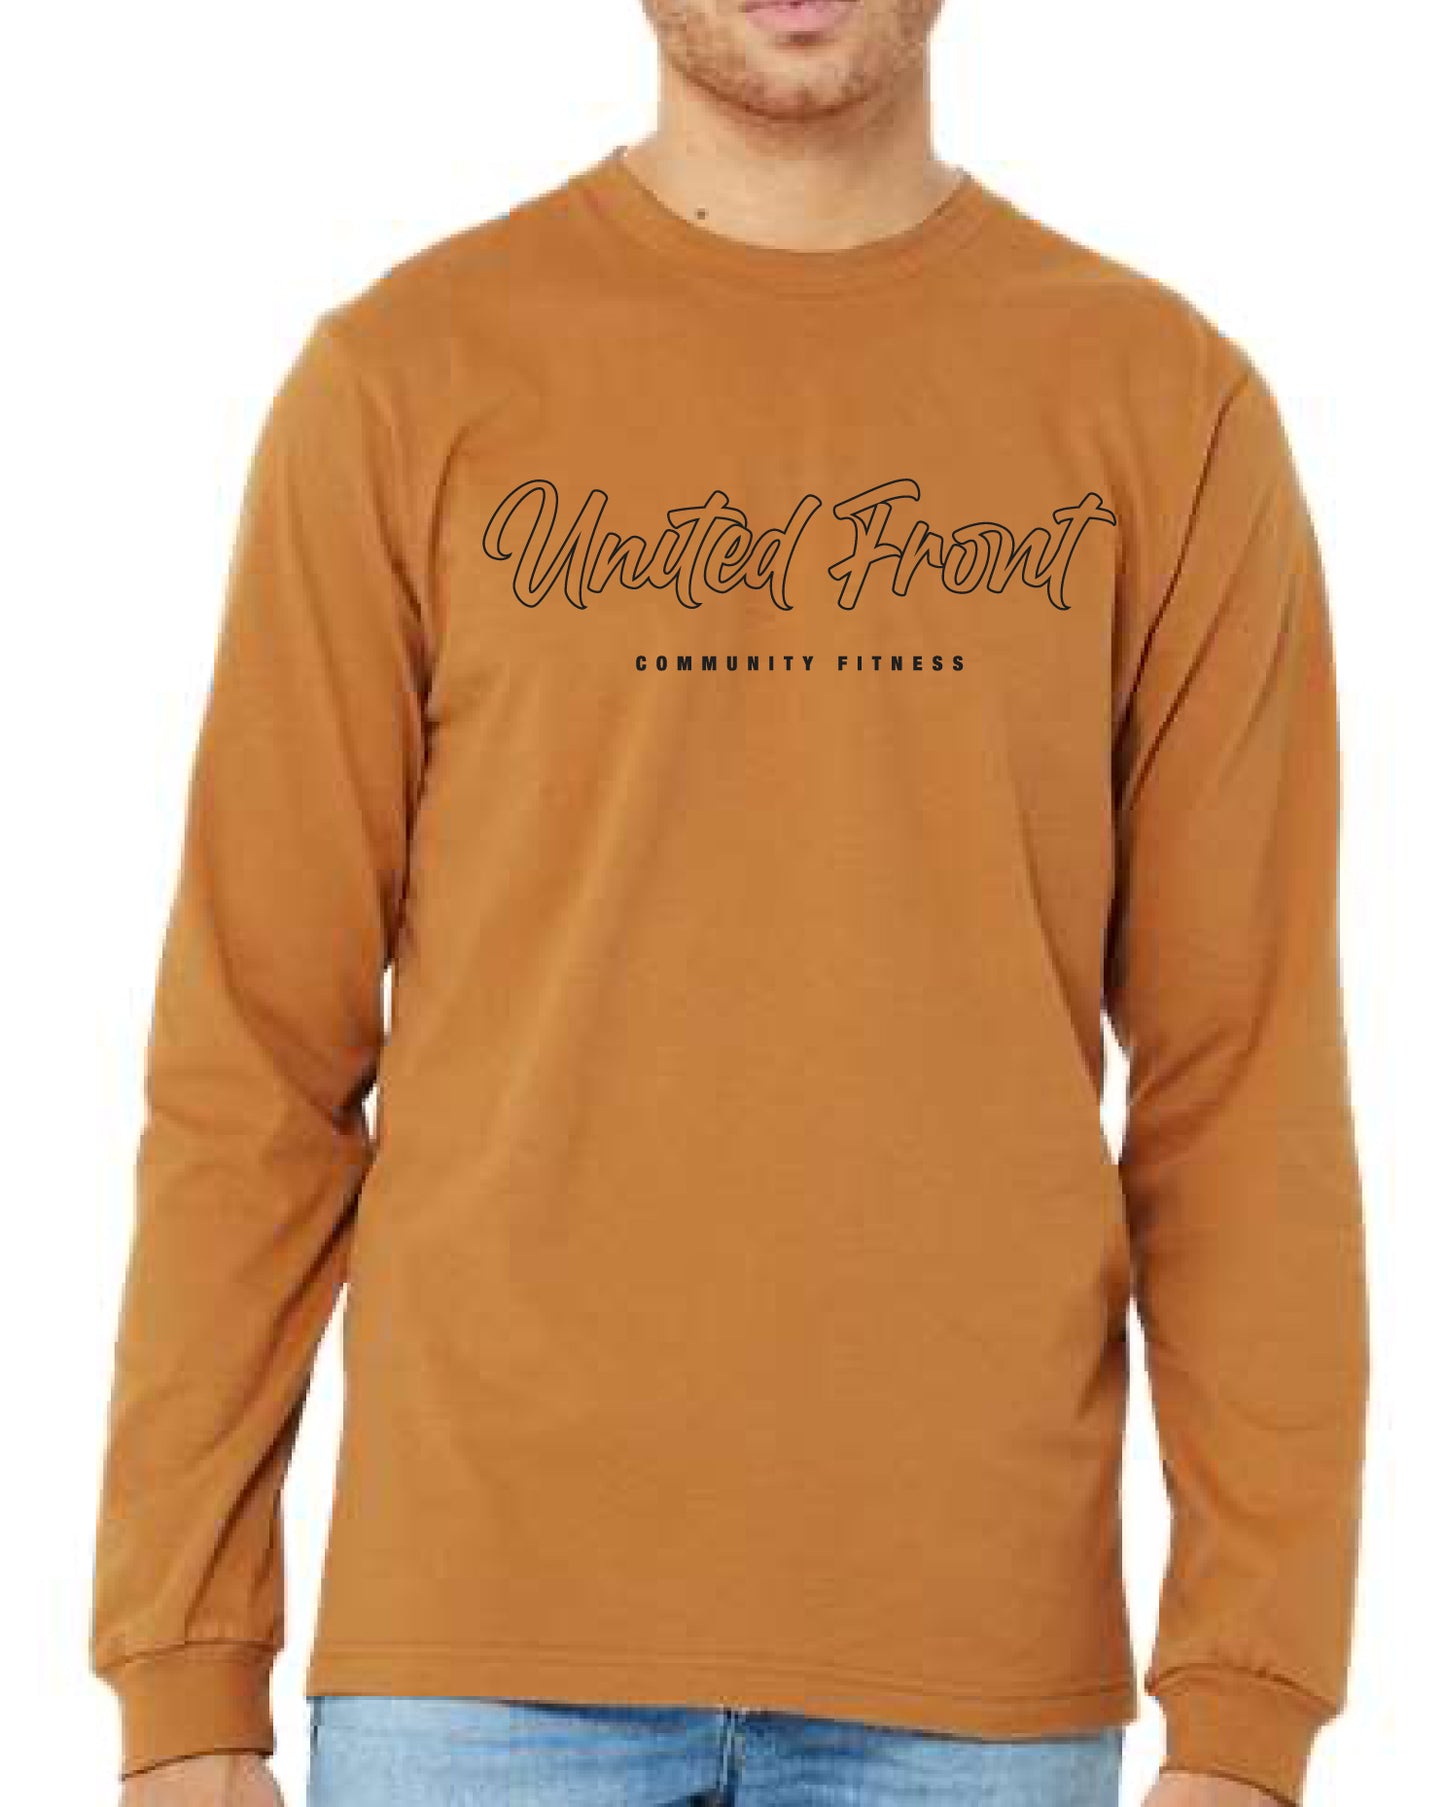 United Front Long Sleeve